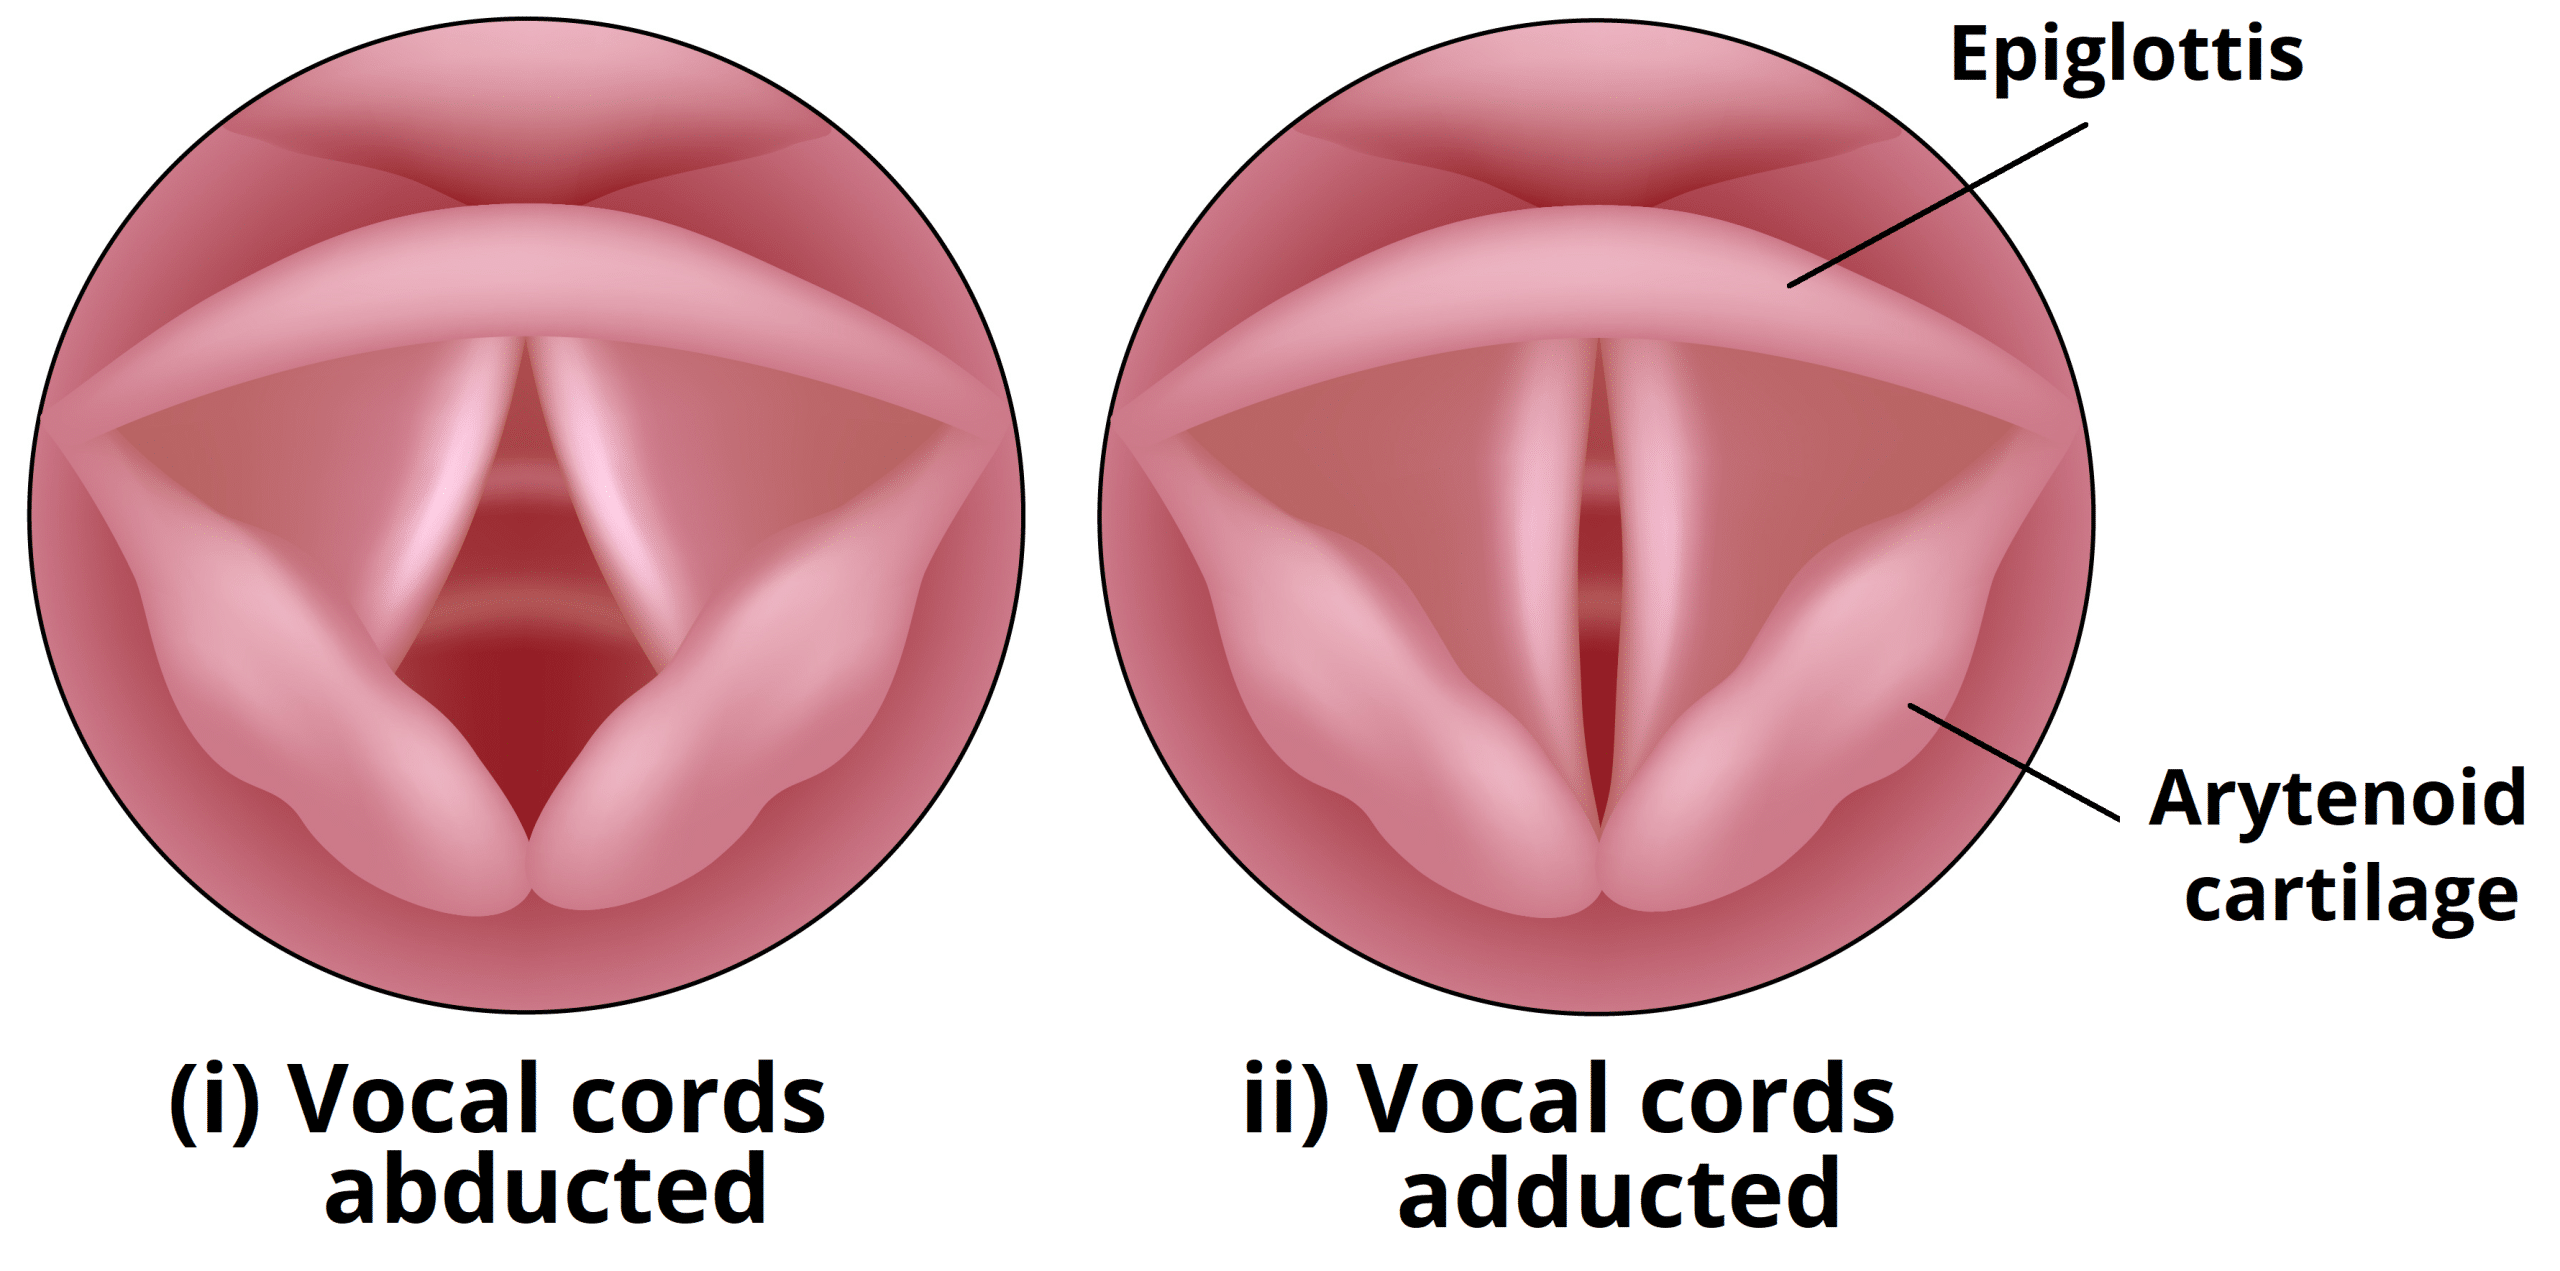 anatomy of vocal cords